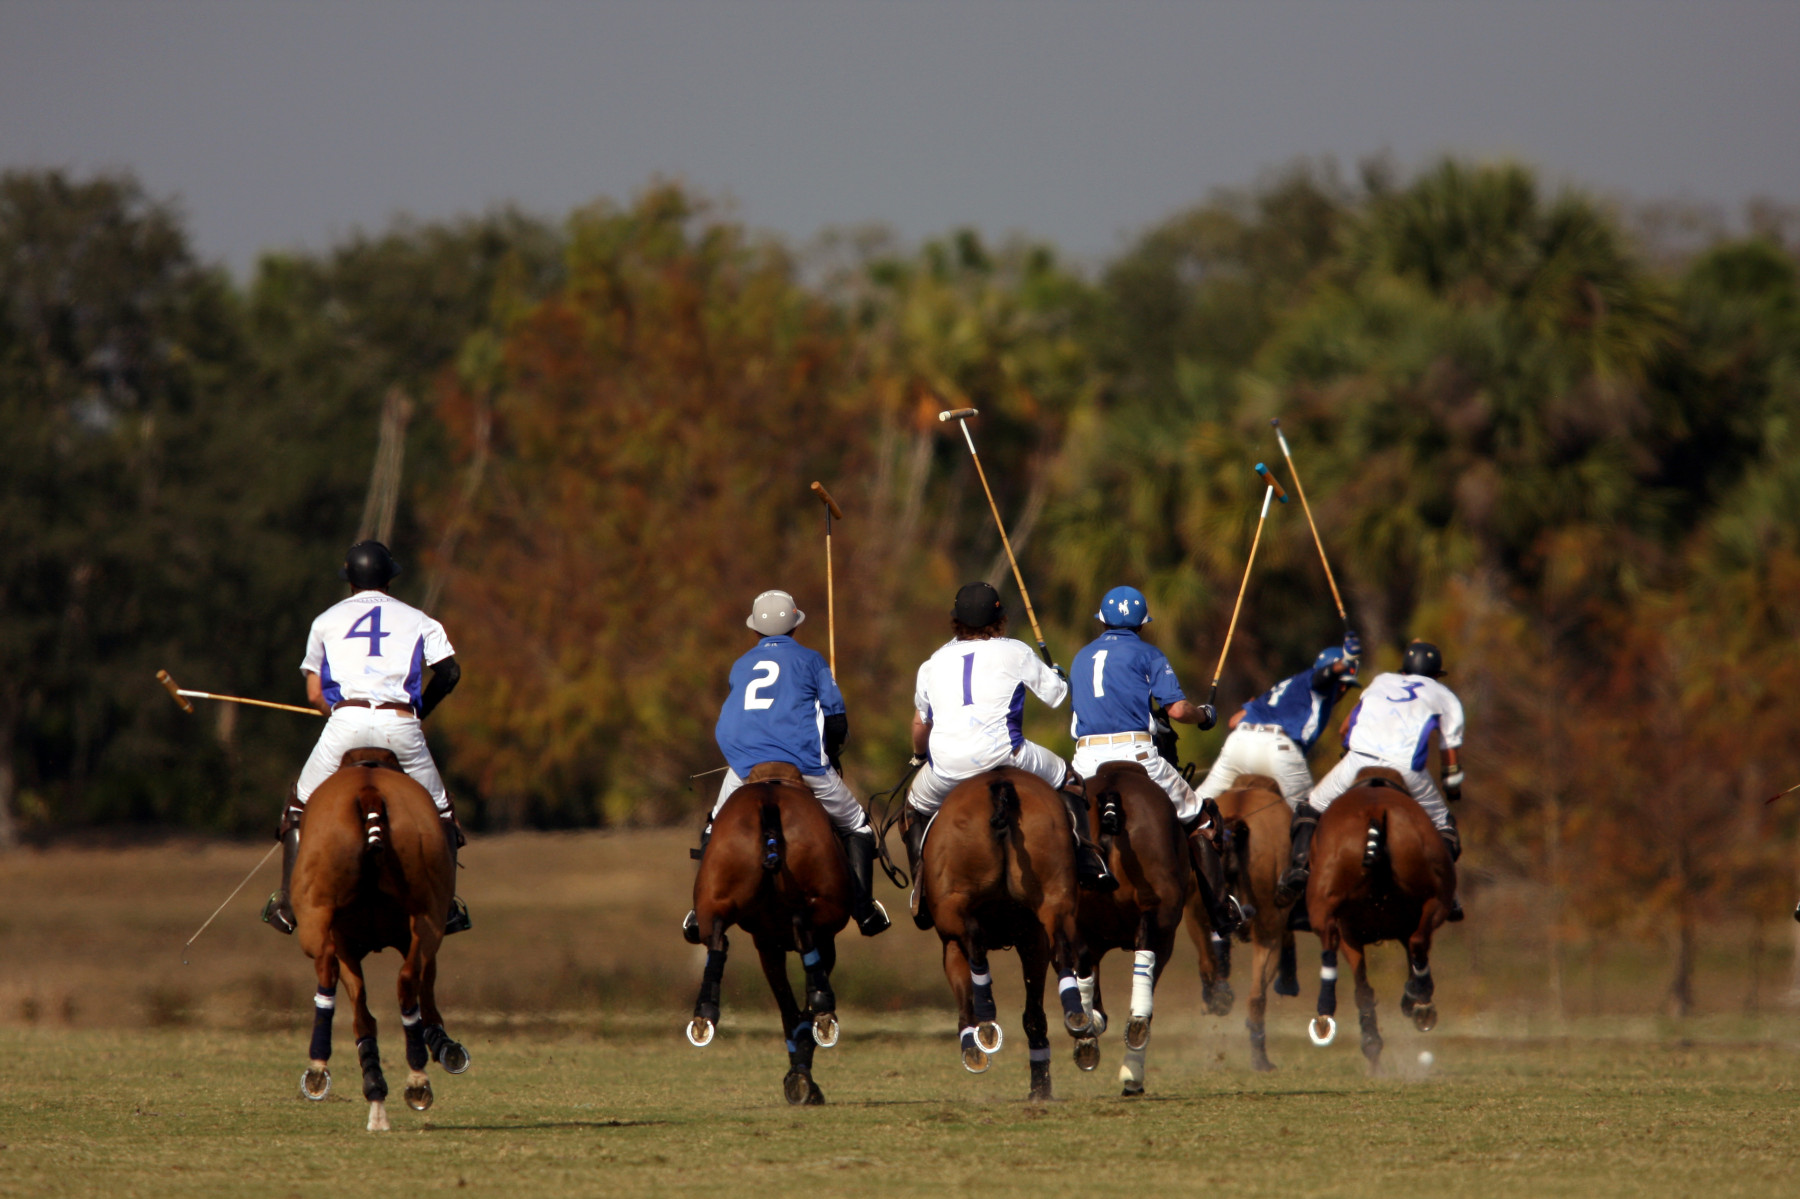 Polo, Wellington, Florida : Sports : Photography by Adam Stoltman: Sports Photography, The Arts, Portraiture, Travel, Photojournalism and Fine Art in New York